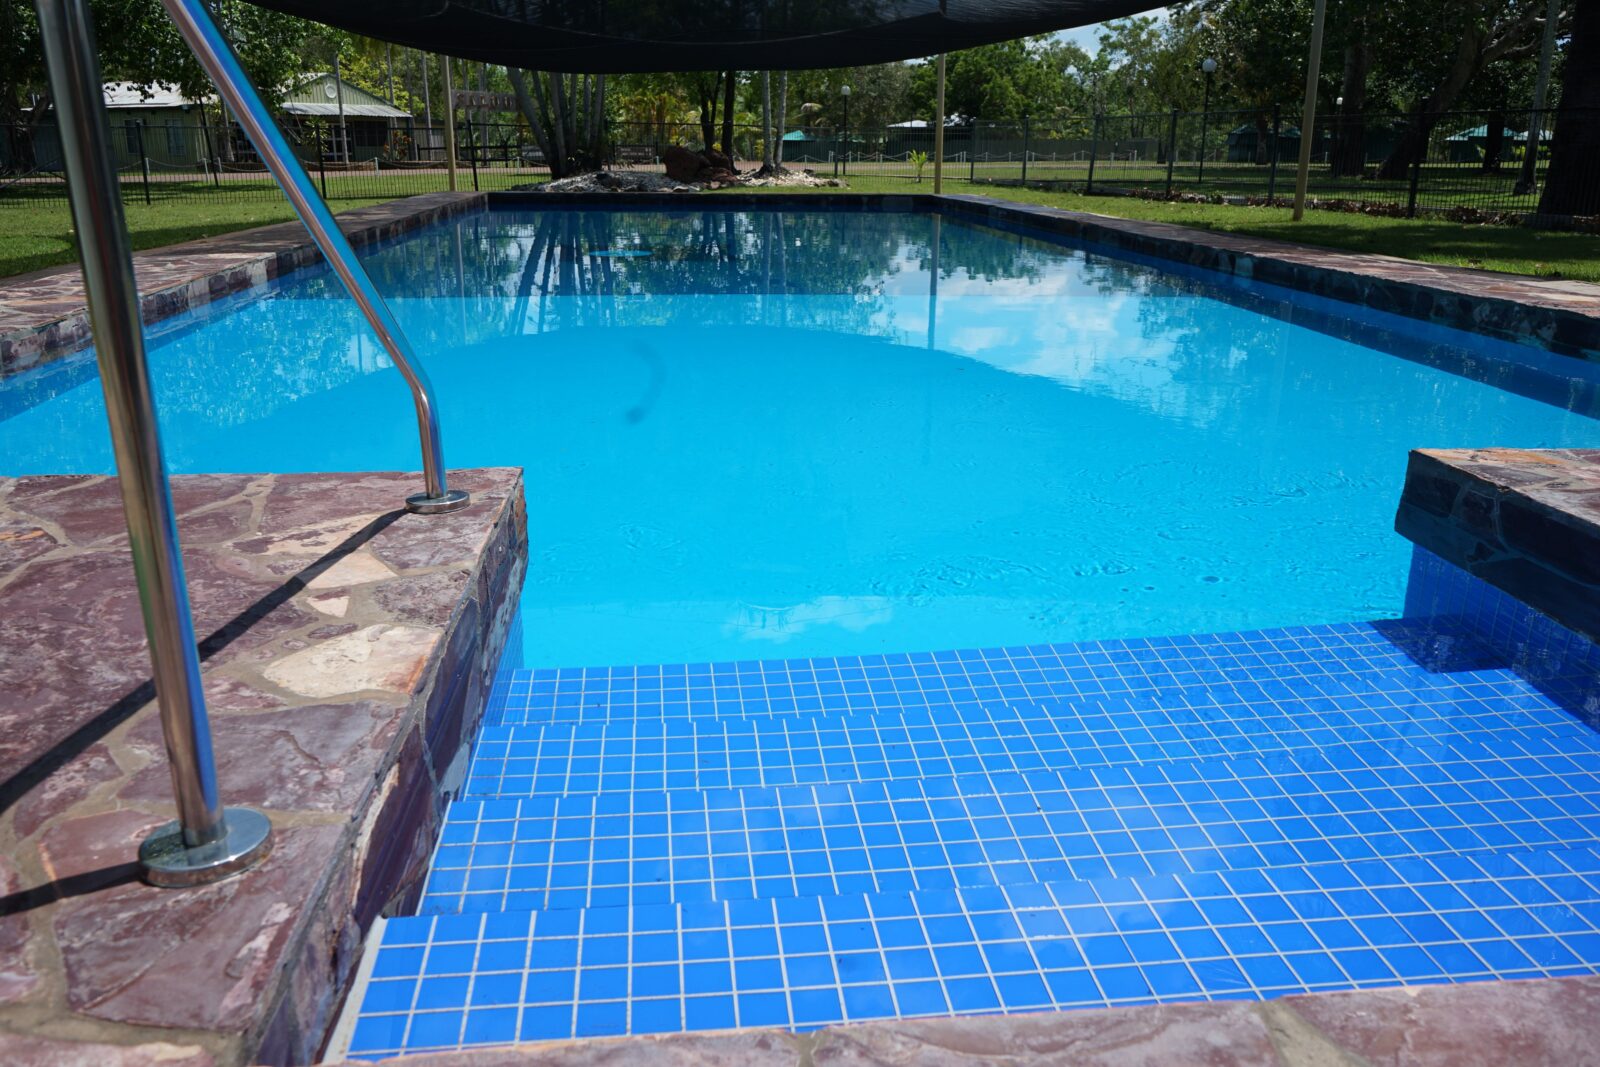 Saltwater swimming pool - open daylight hours